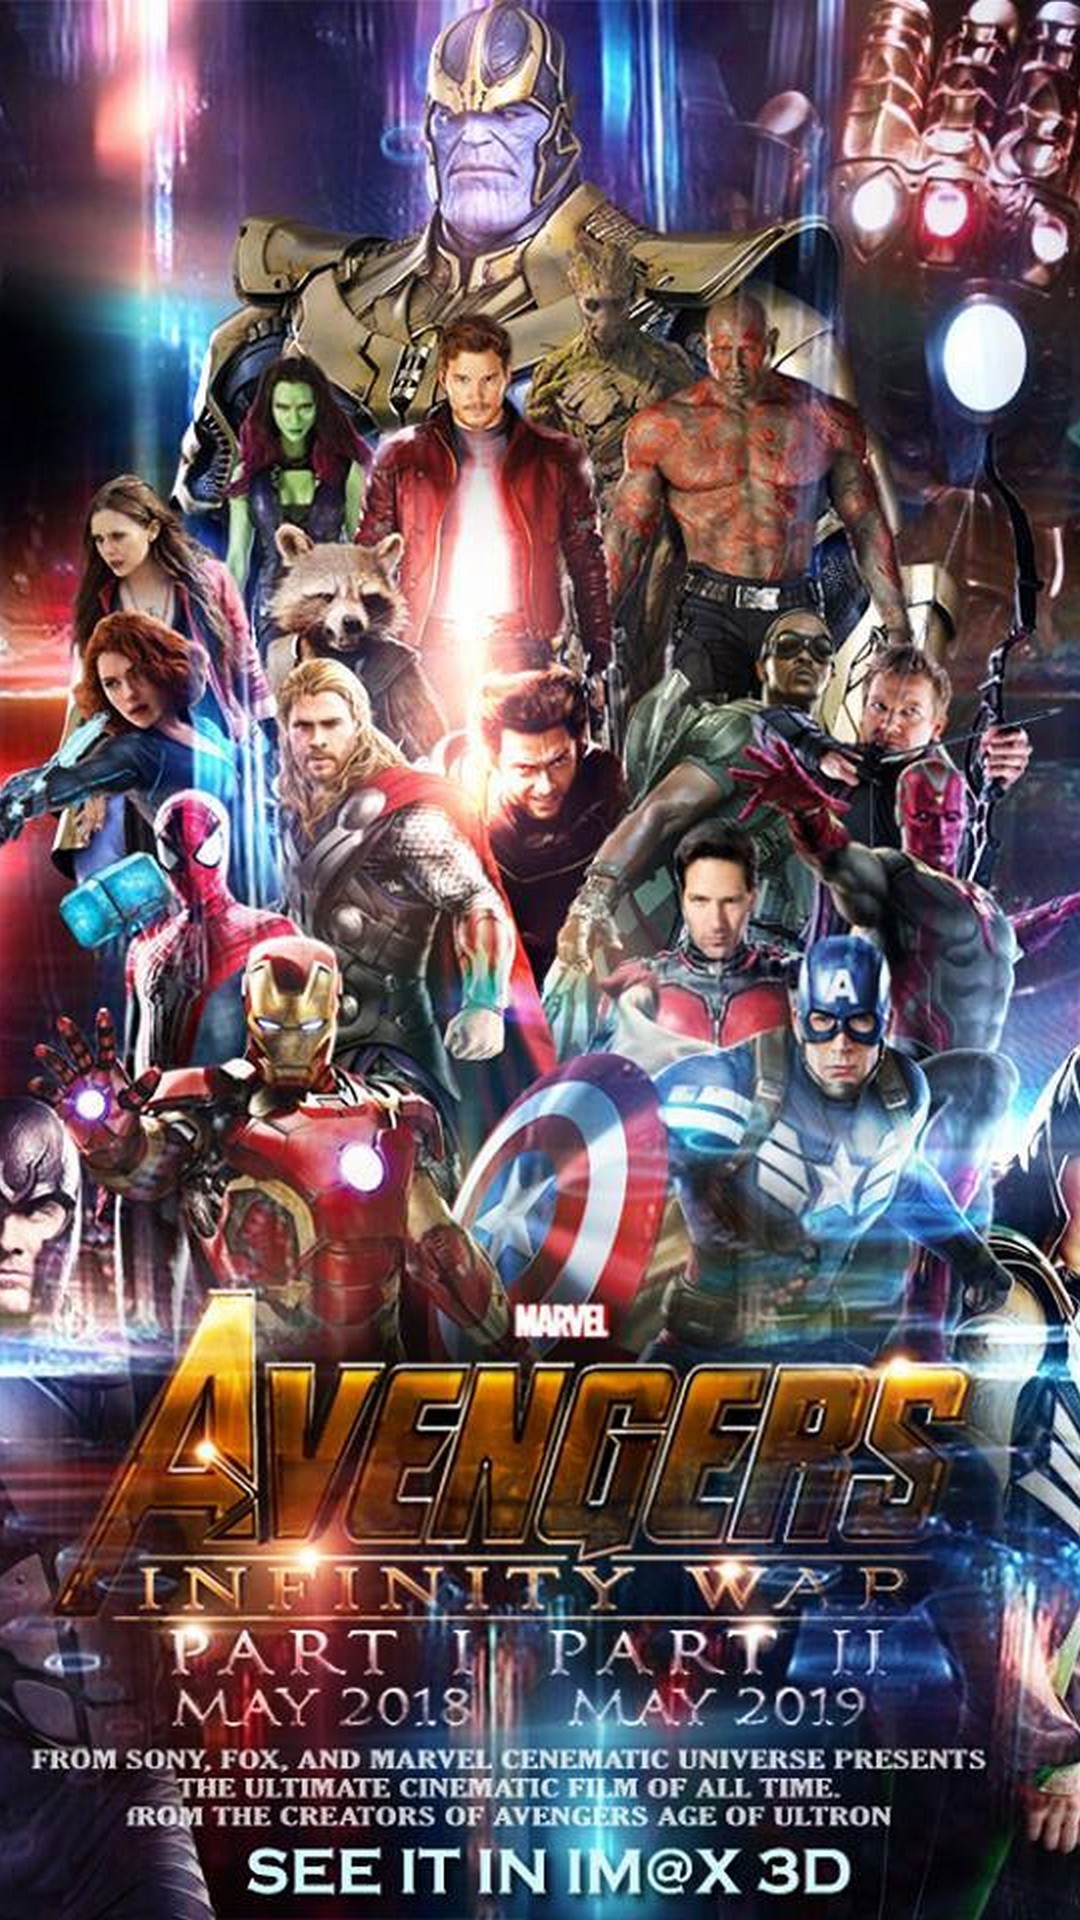 Avengers Infinity War Characters Wallpaper Android with HD resolution 1080x1920